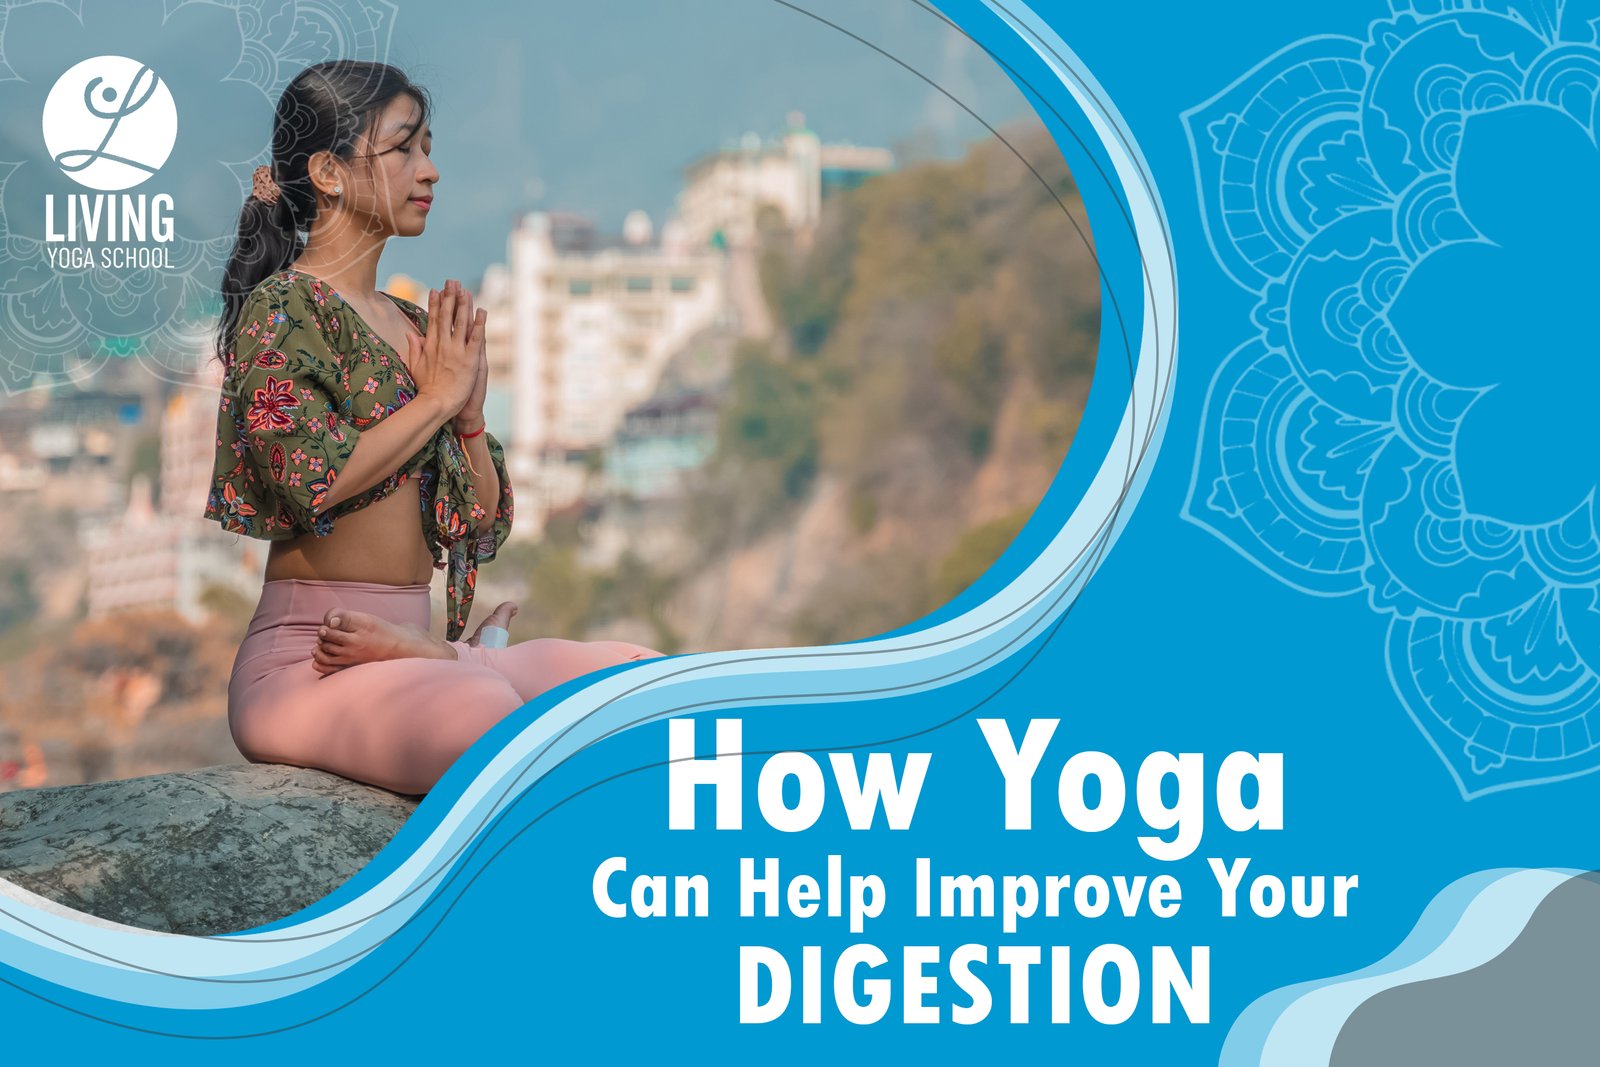 How Yoga Can Help Improve Your Digestion